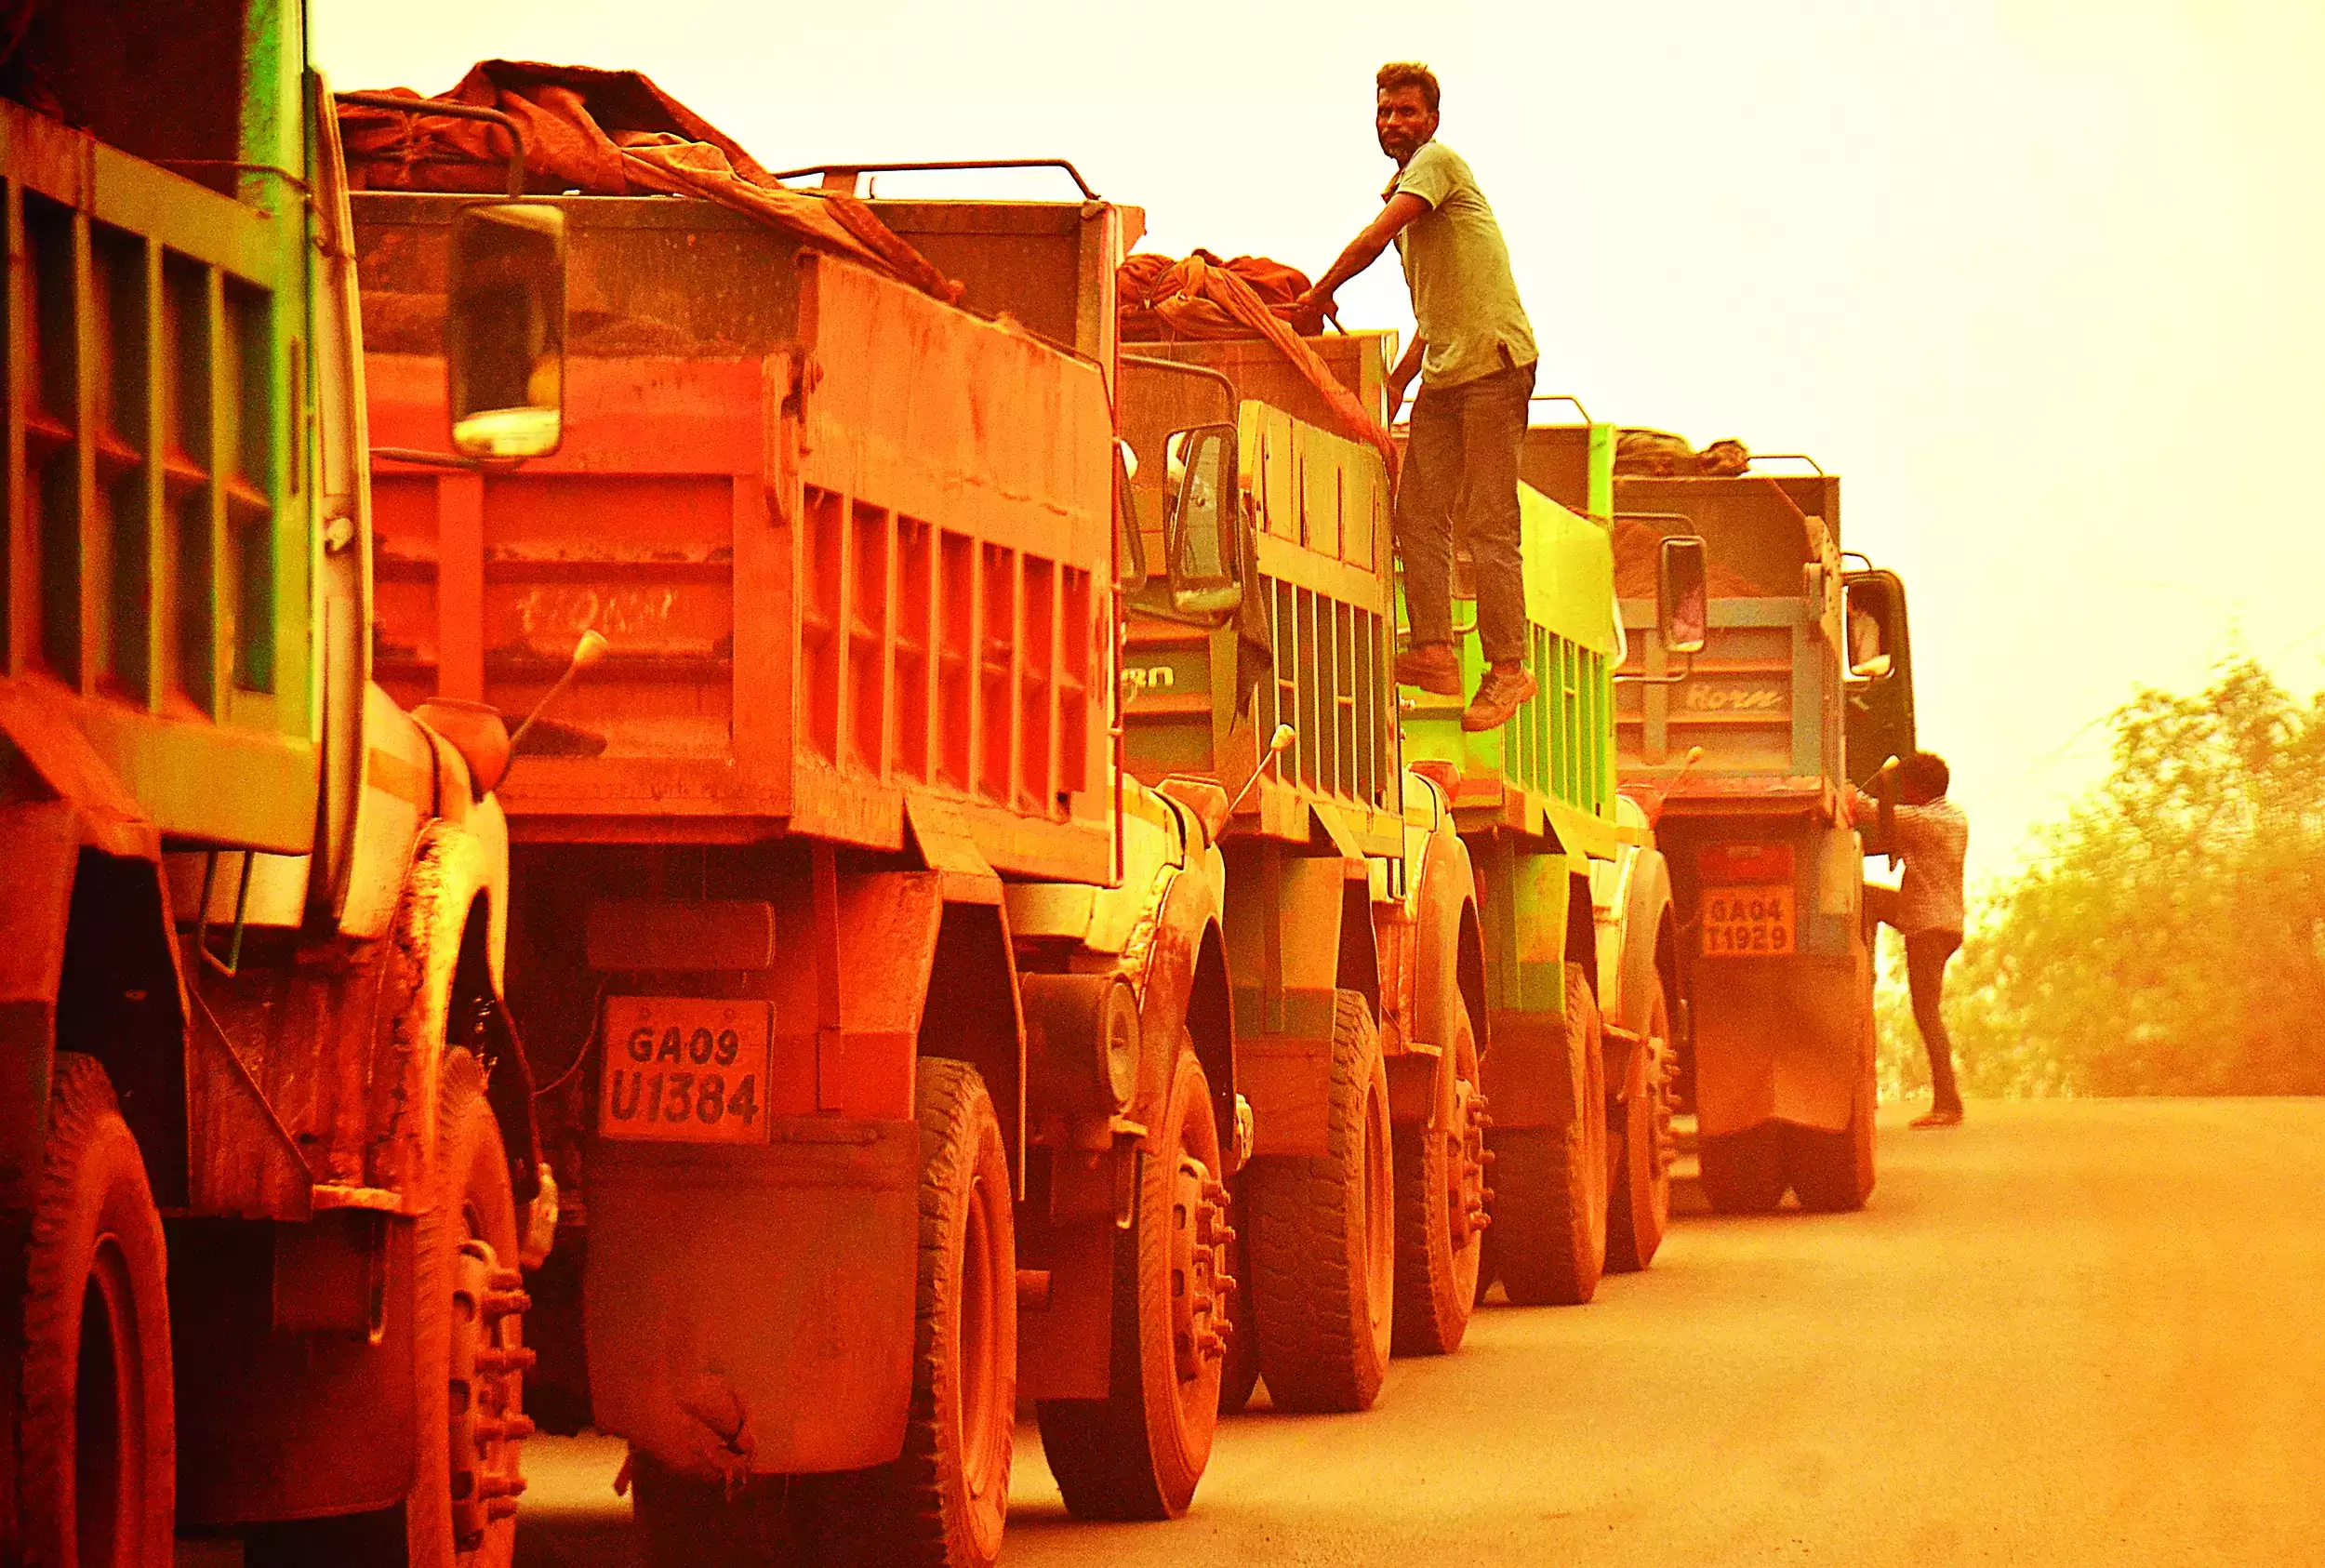 Study each ore transport route properly before nod: HC to govt